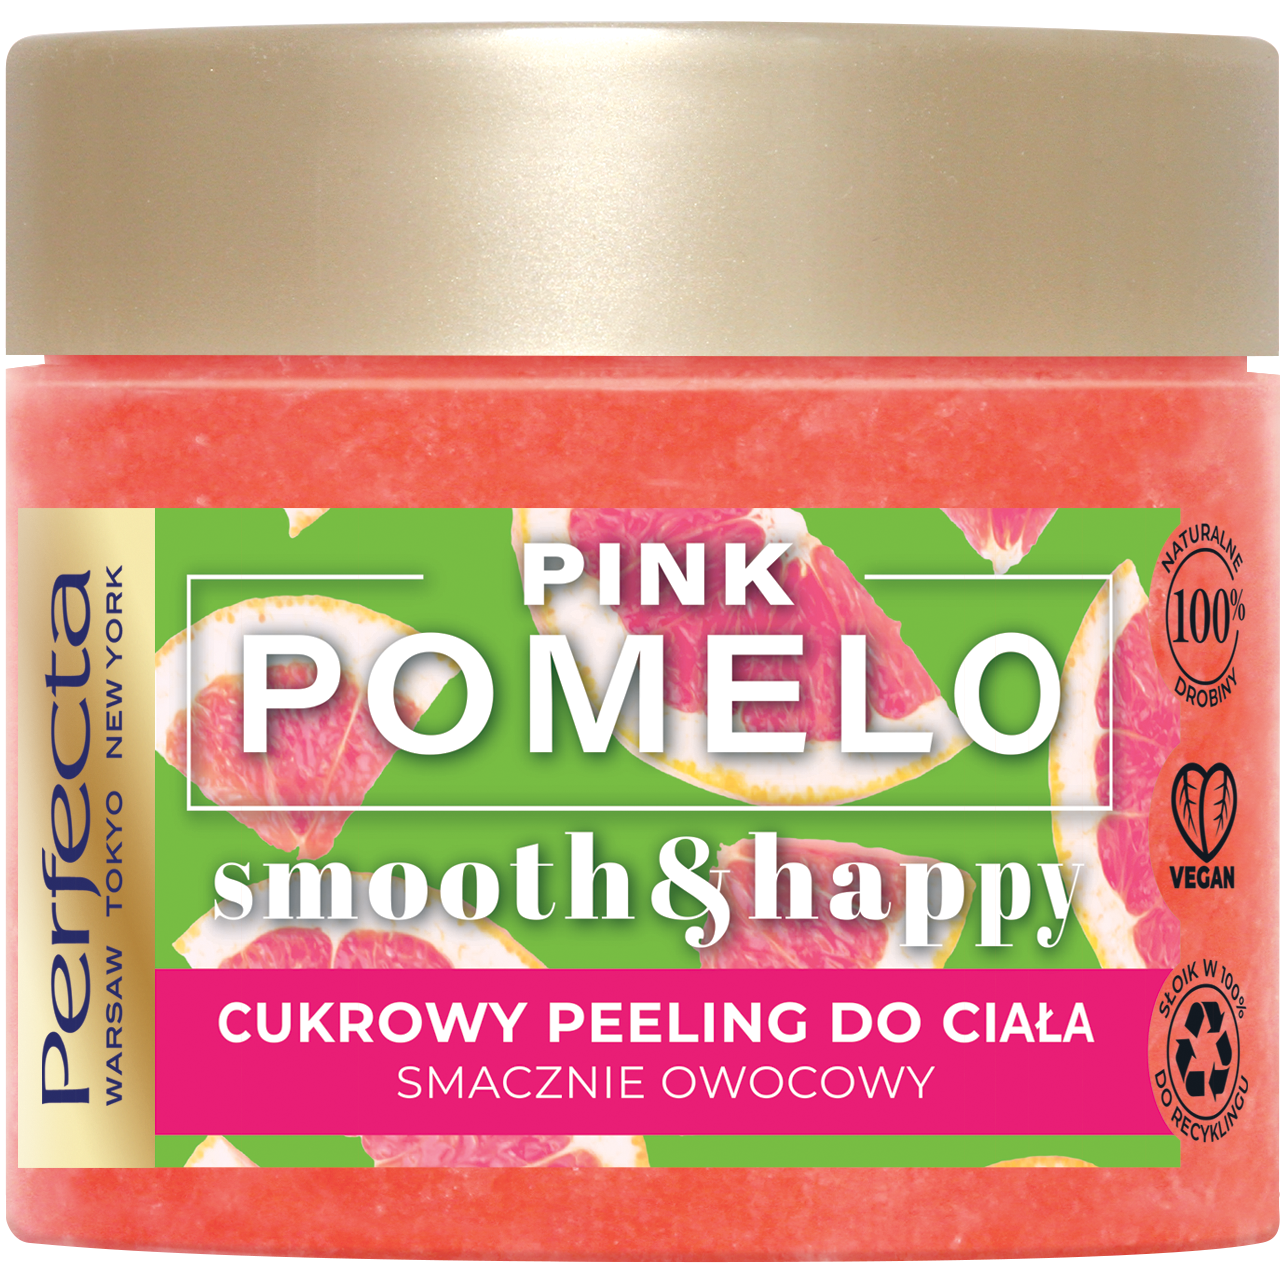 Perfecta Pomelo сахарный скраб для тела, 300 г скраб для тела pink pomelo